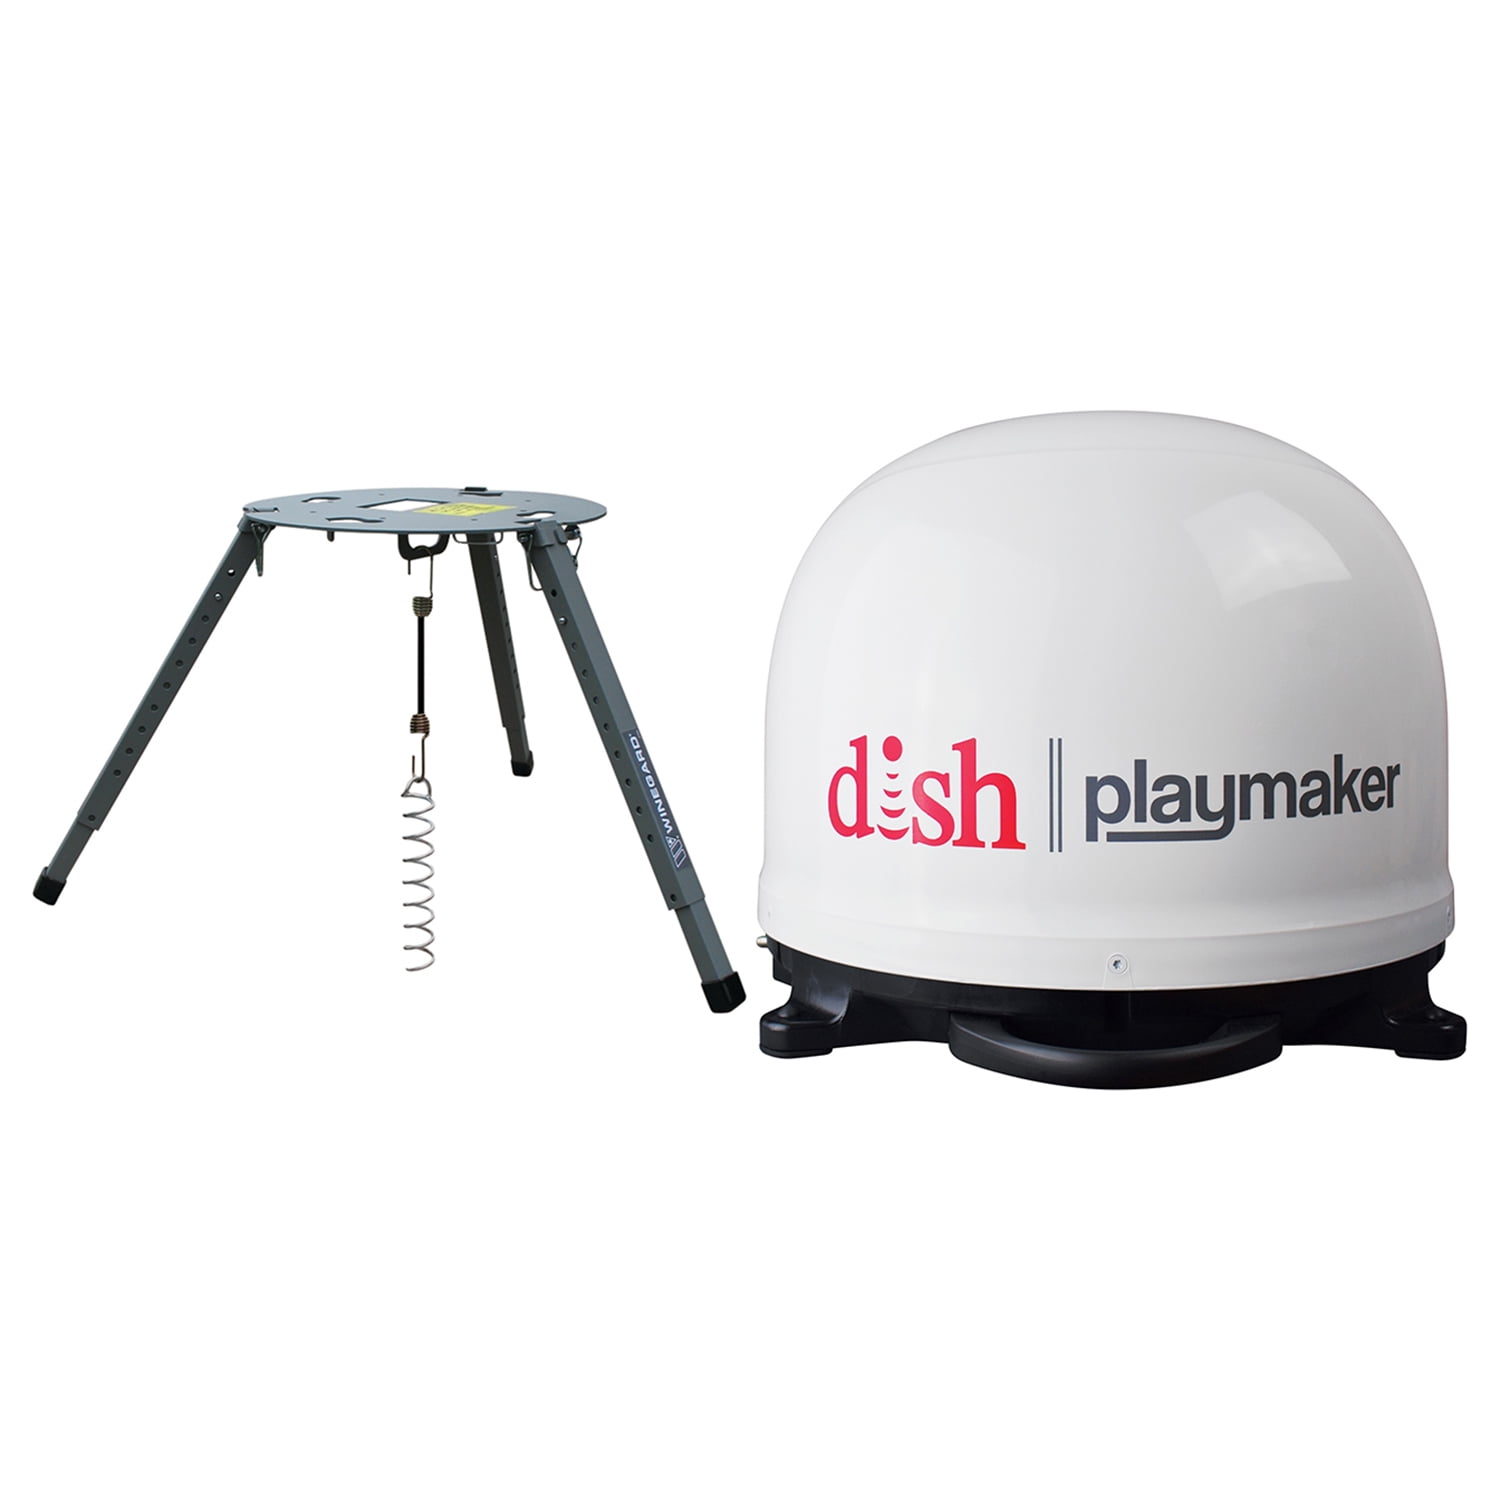 Winegard PL-7000 Dish Playmaker Portable Automatic Satellite TV Antenna &  TR-1518 Carryout Tripod Mount